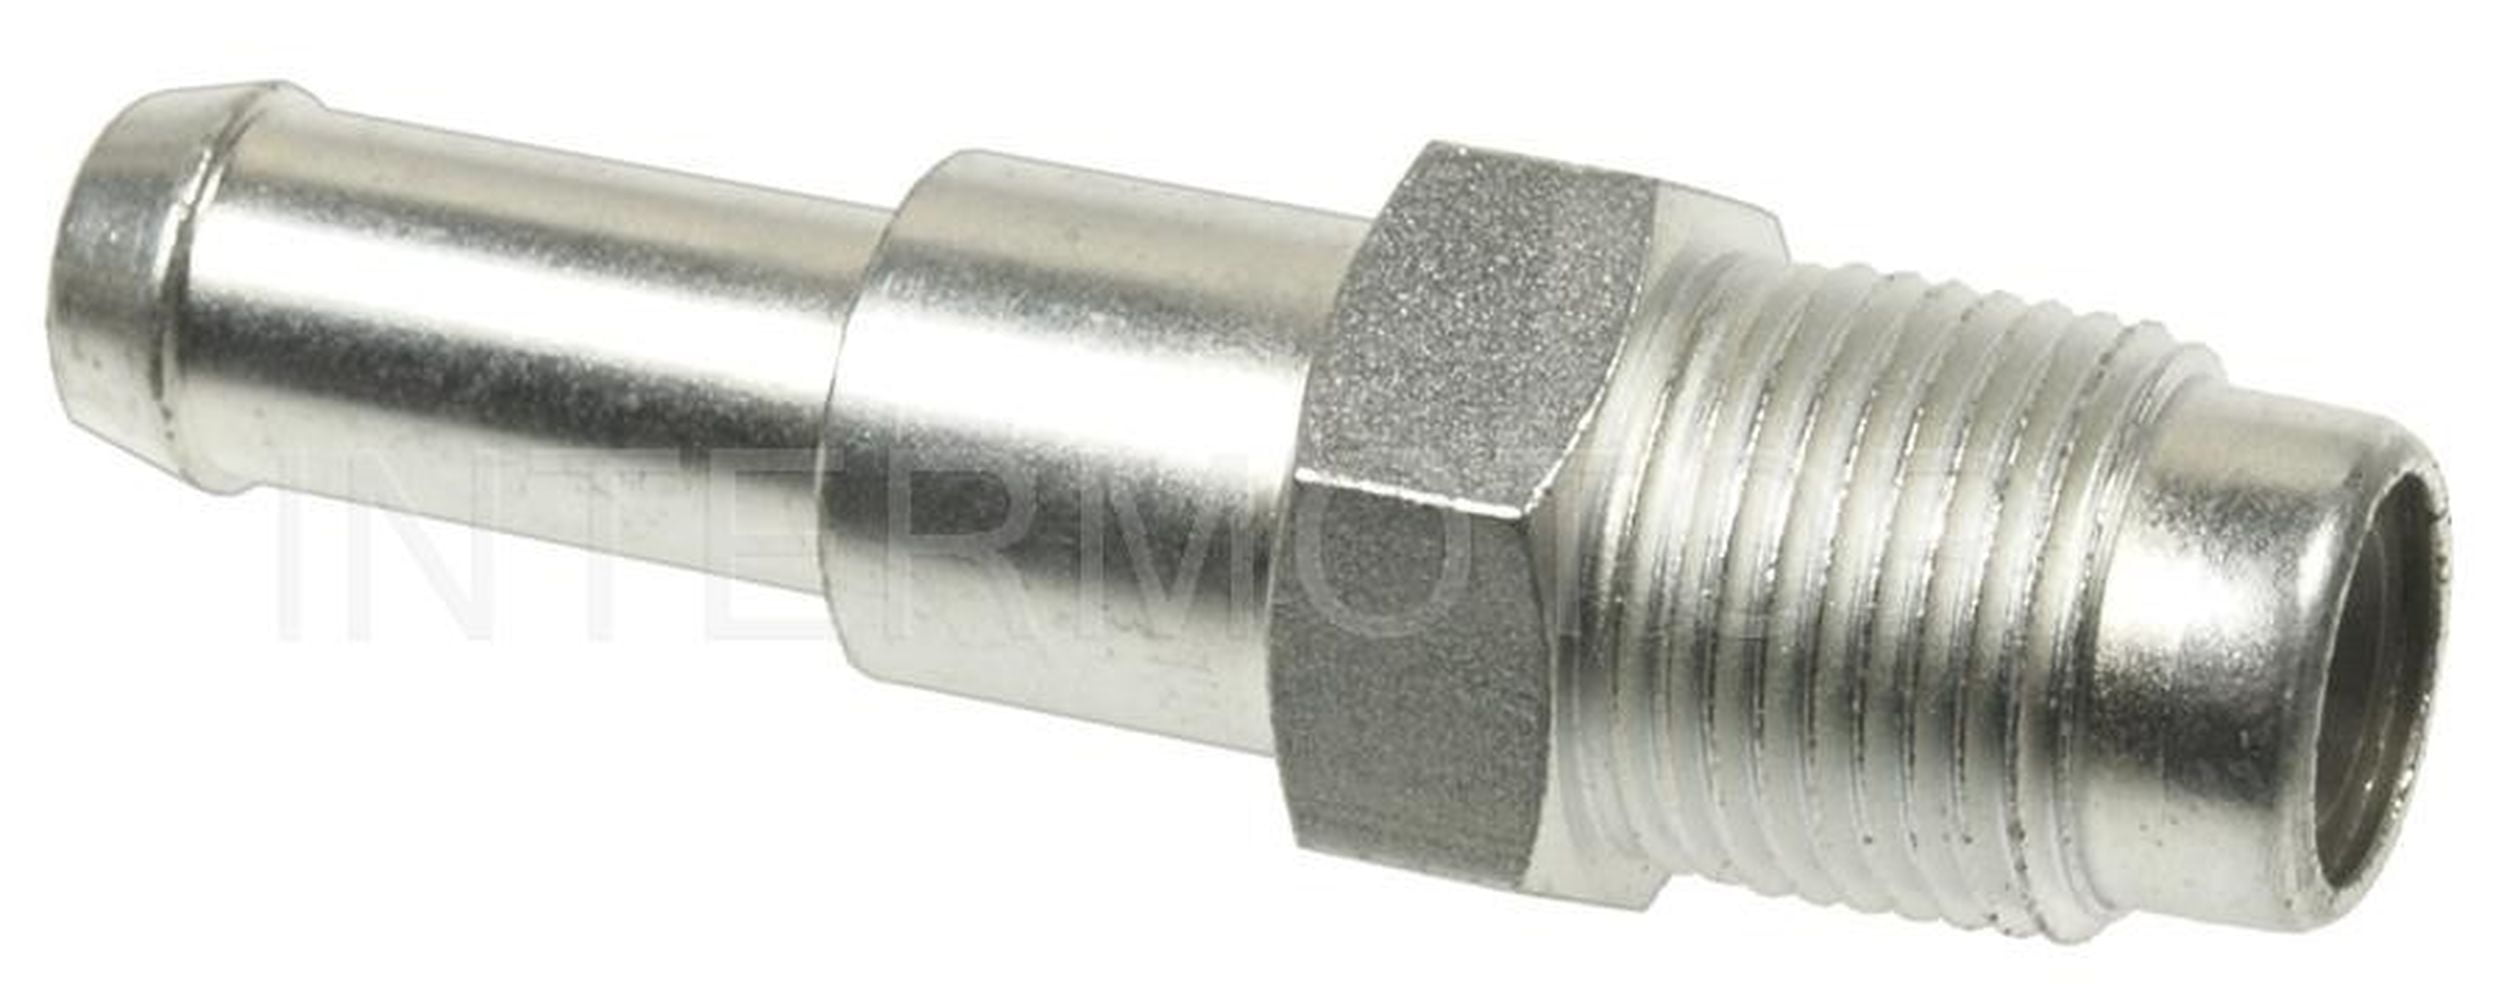 HIGH PRESSURE STAINLESS STEEL MALE MIDI 14.8MM QUICK RELEASE COUPLING X 3/8 BSP 